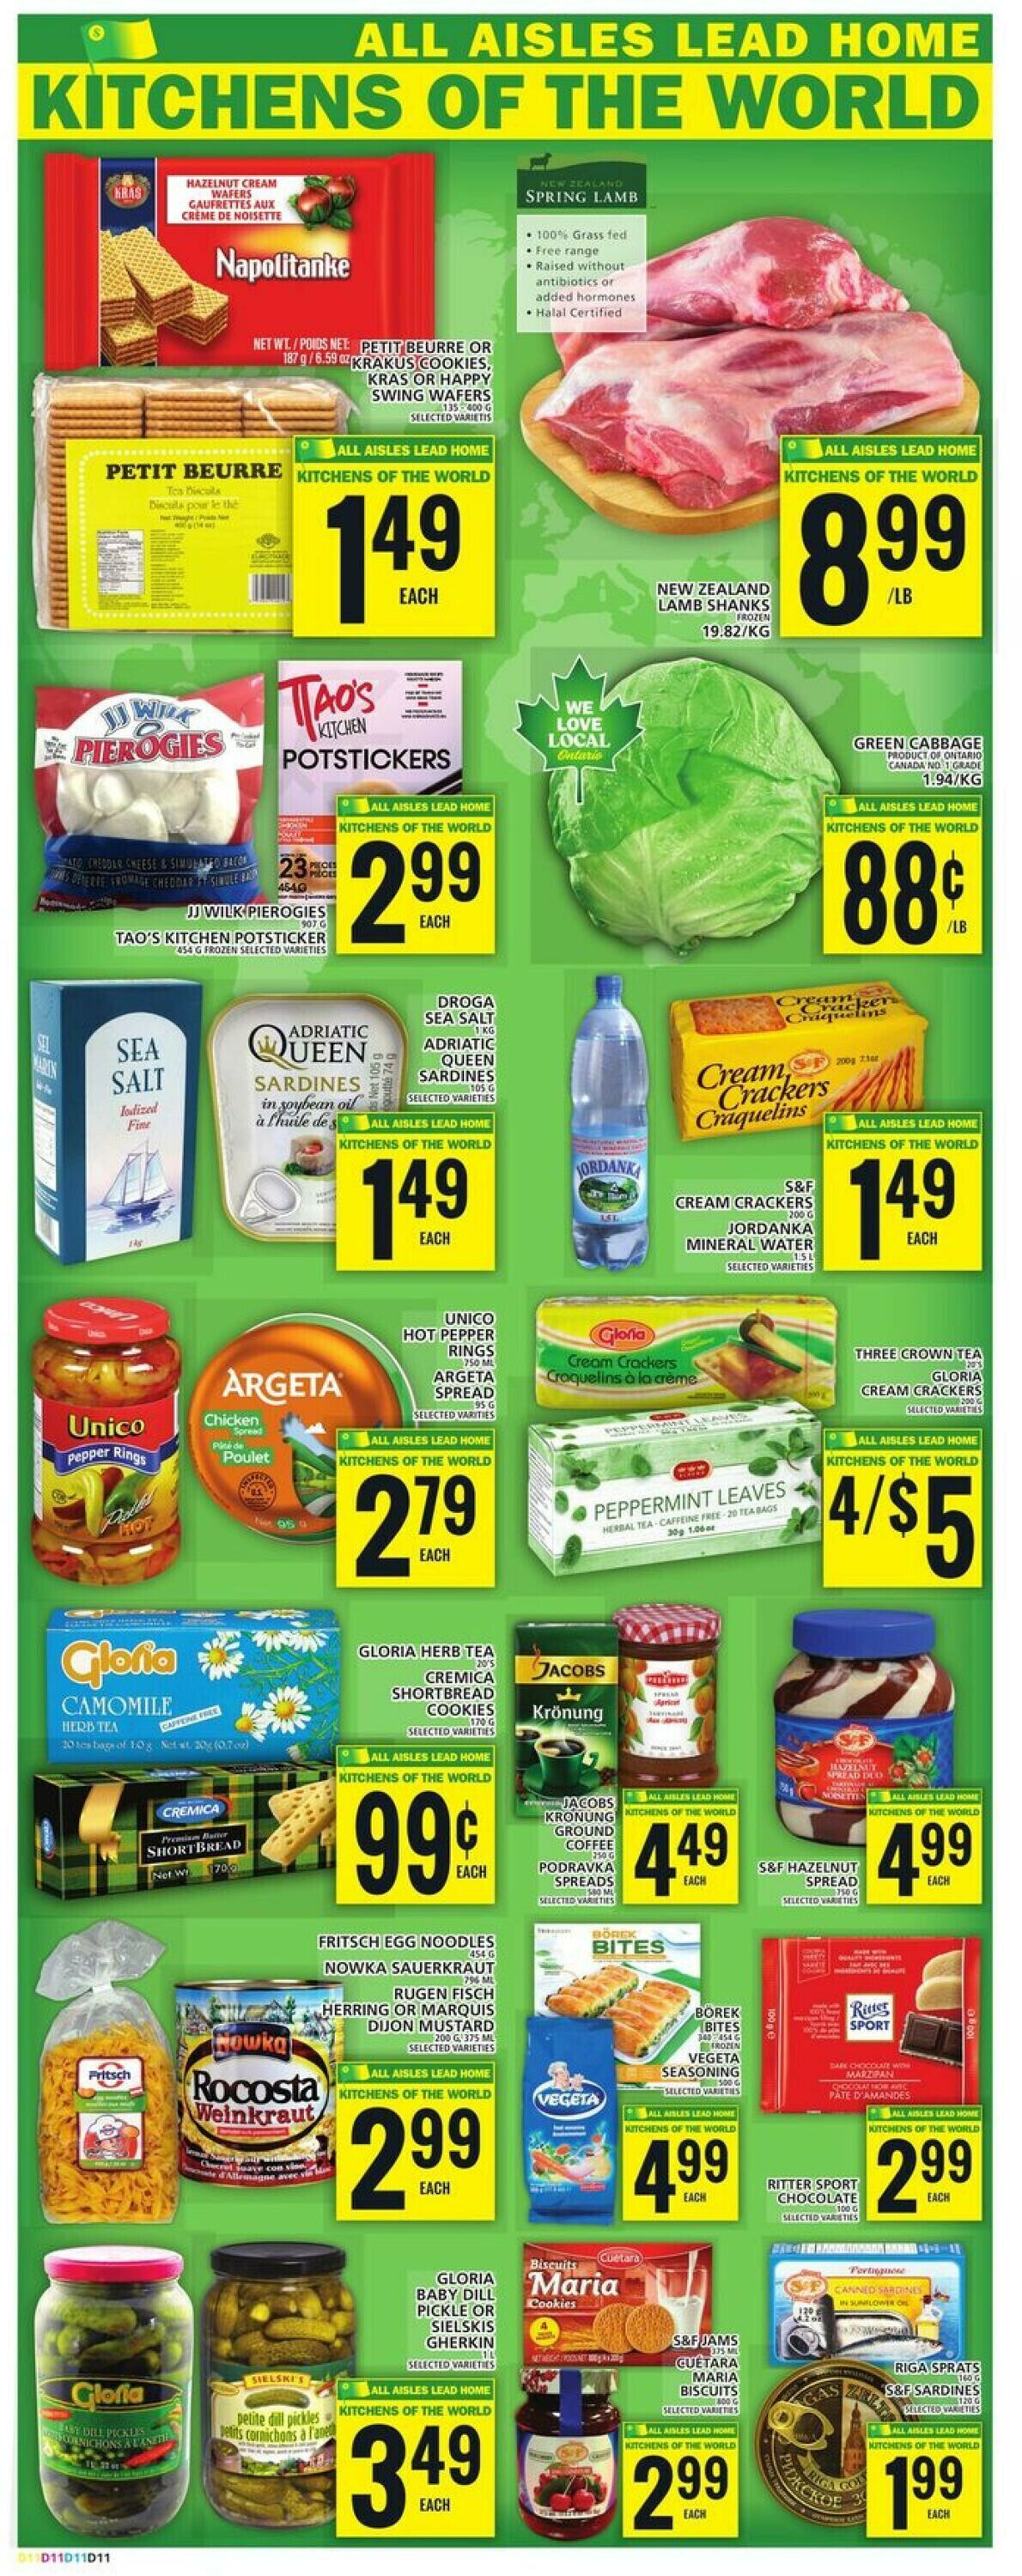 Food Basics Flyer from 12/07/2023